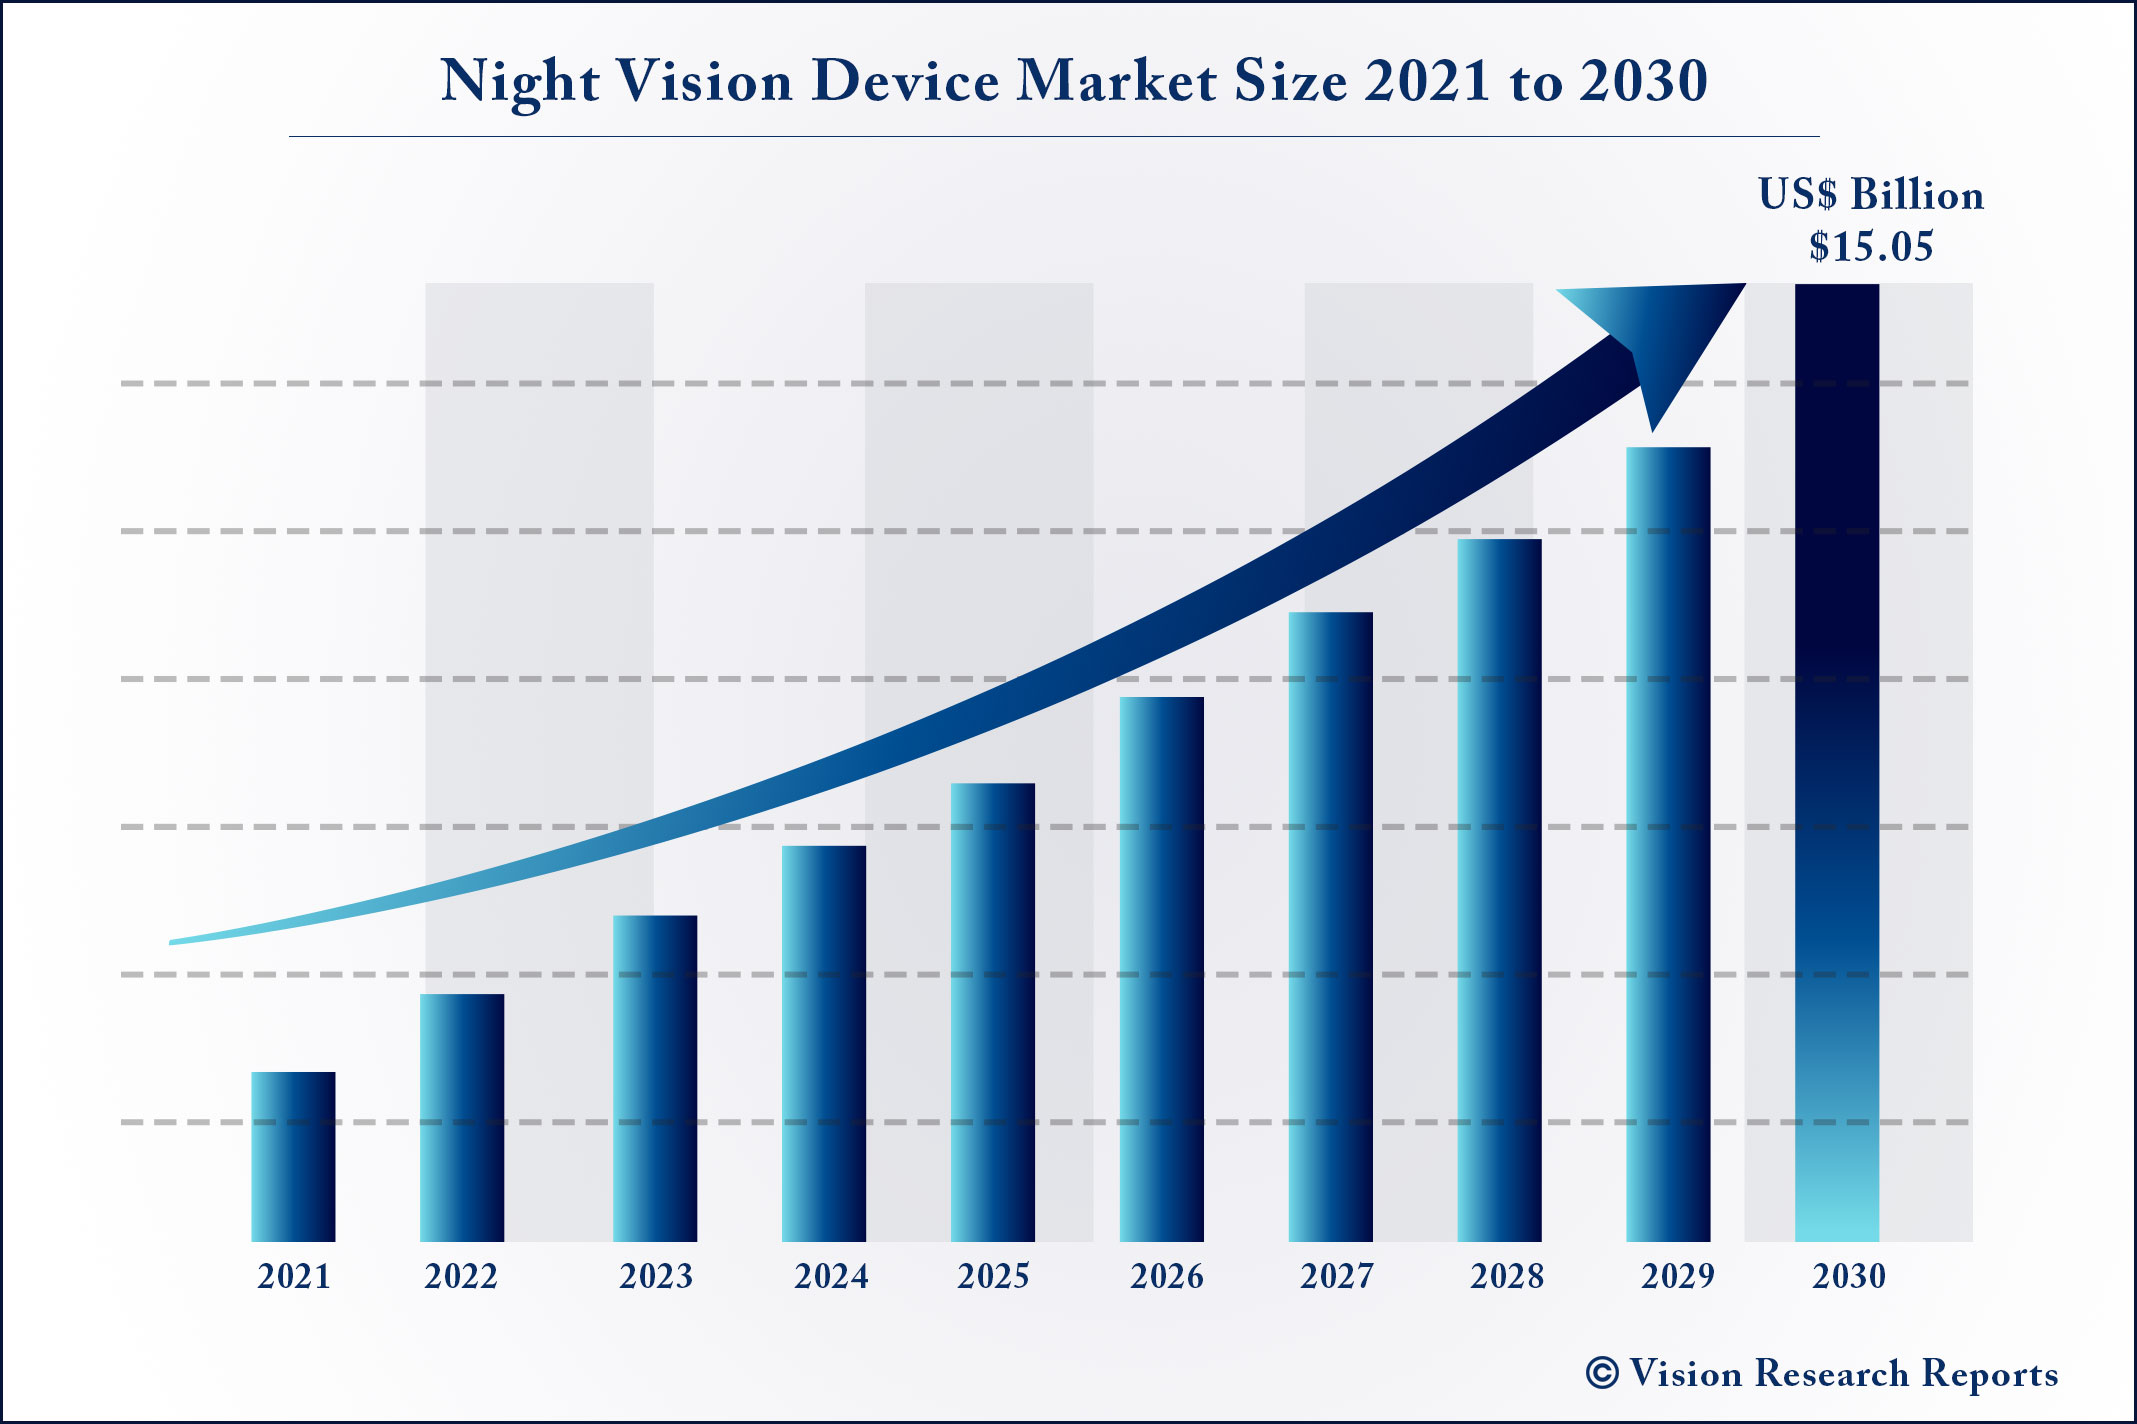 Night Vision Device Market Size 2021 to 2030